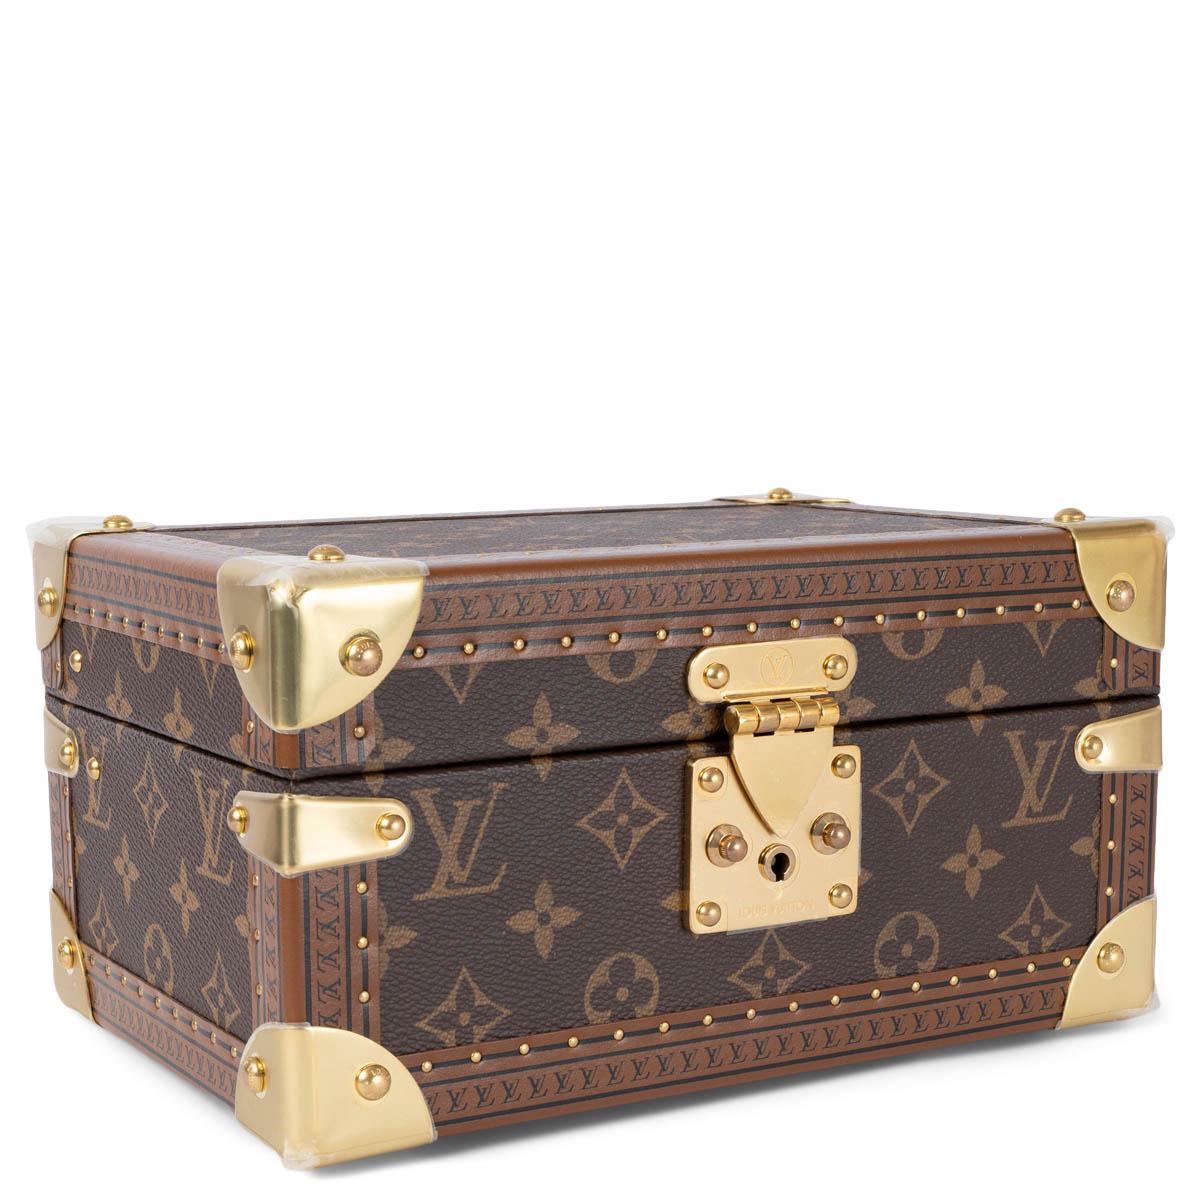 100% authentic Louis Vuitton Coffret Trésor 24 treasure case in Ebene brown Monogram canvas. Features hard shell, logo stamped leather trim with brass rivets and corner reinforcements. Closes with a brass lock on the front. Lined in Lagoon blue